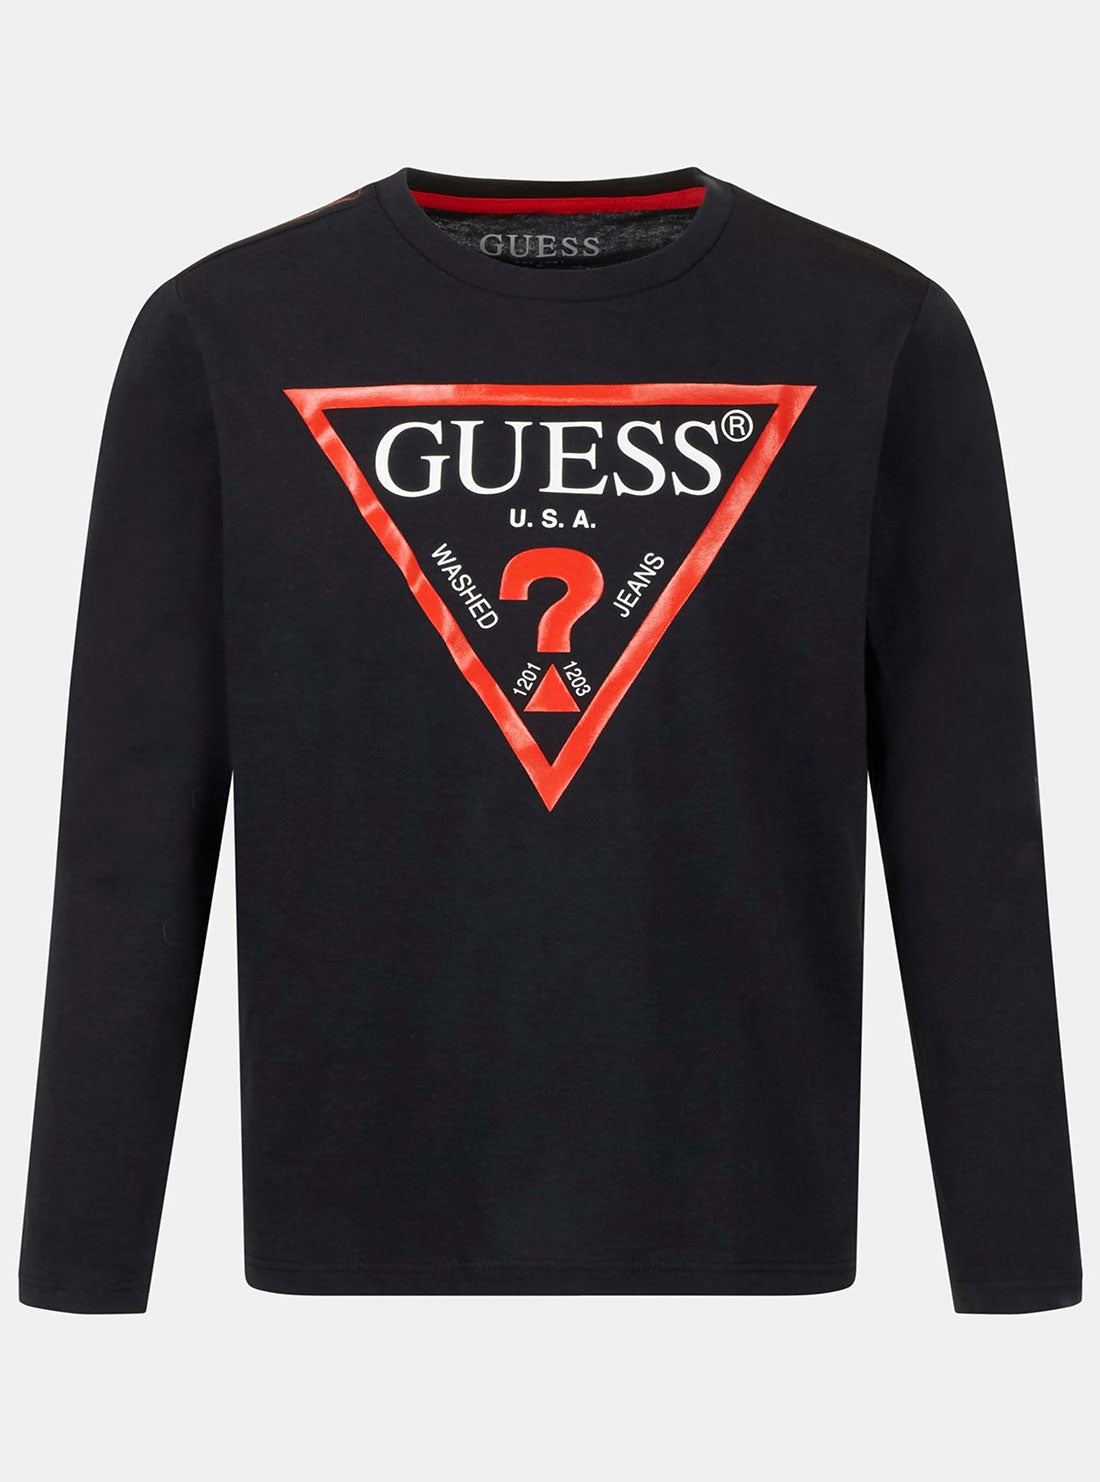 Boy's Black Triangle Logo Long Sleeve Top (7-16) | GUESS Kids | front view